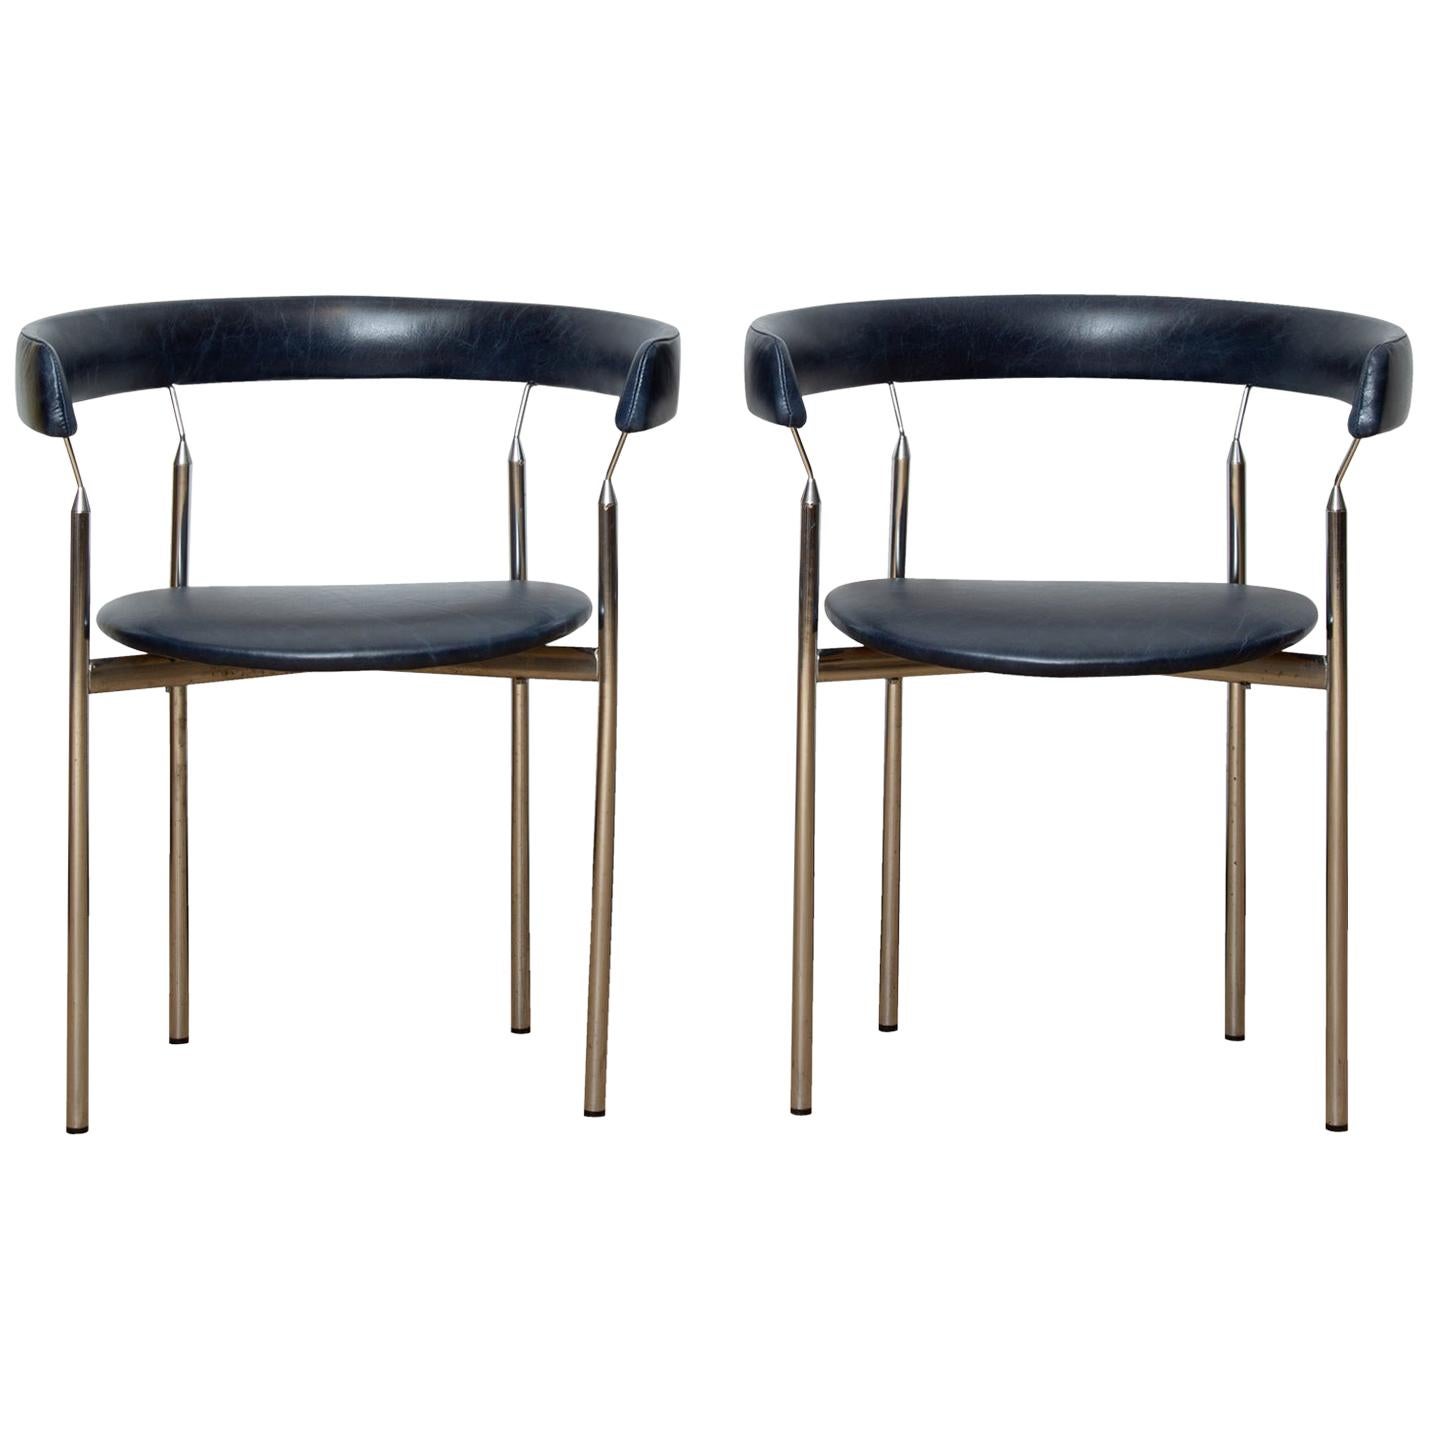 Pair of 'Rondo' Chairs by Jan Lunde Knudsen, 1960s For Sale